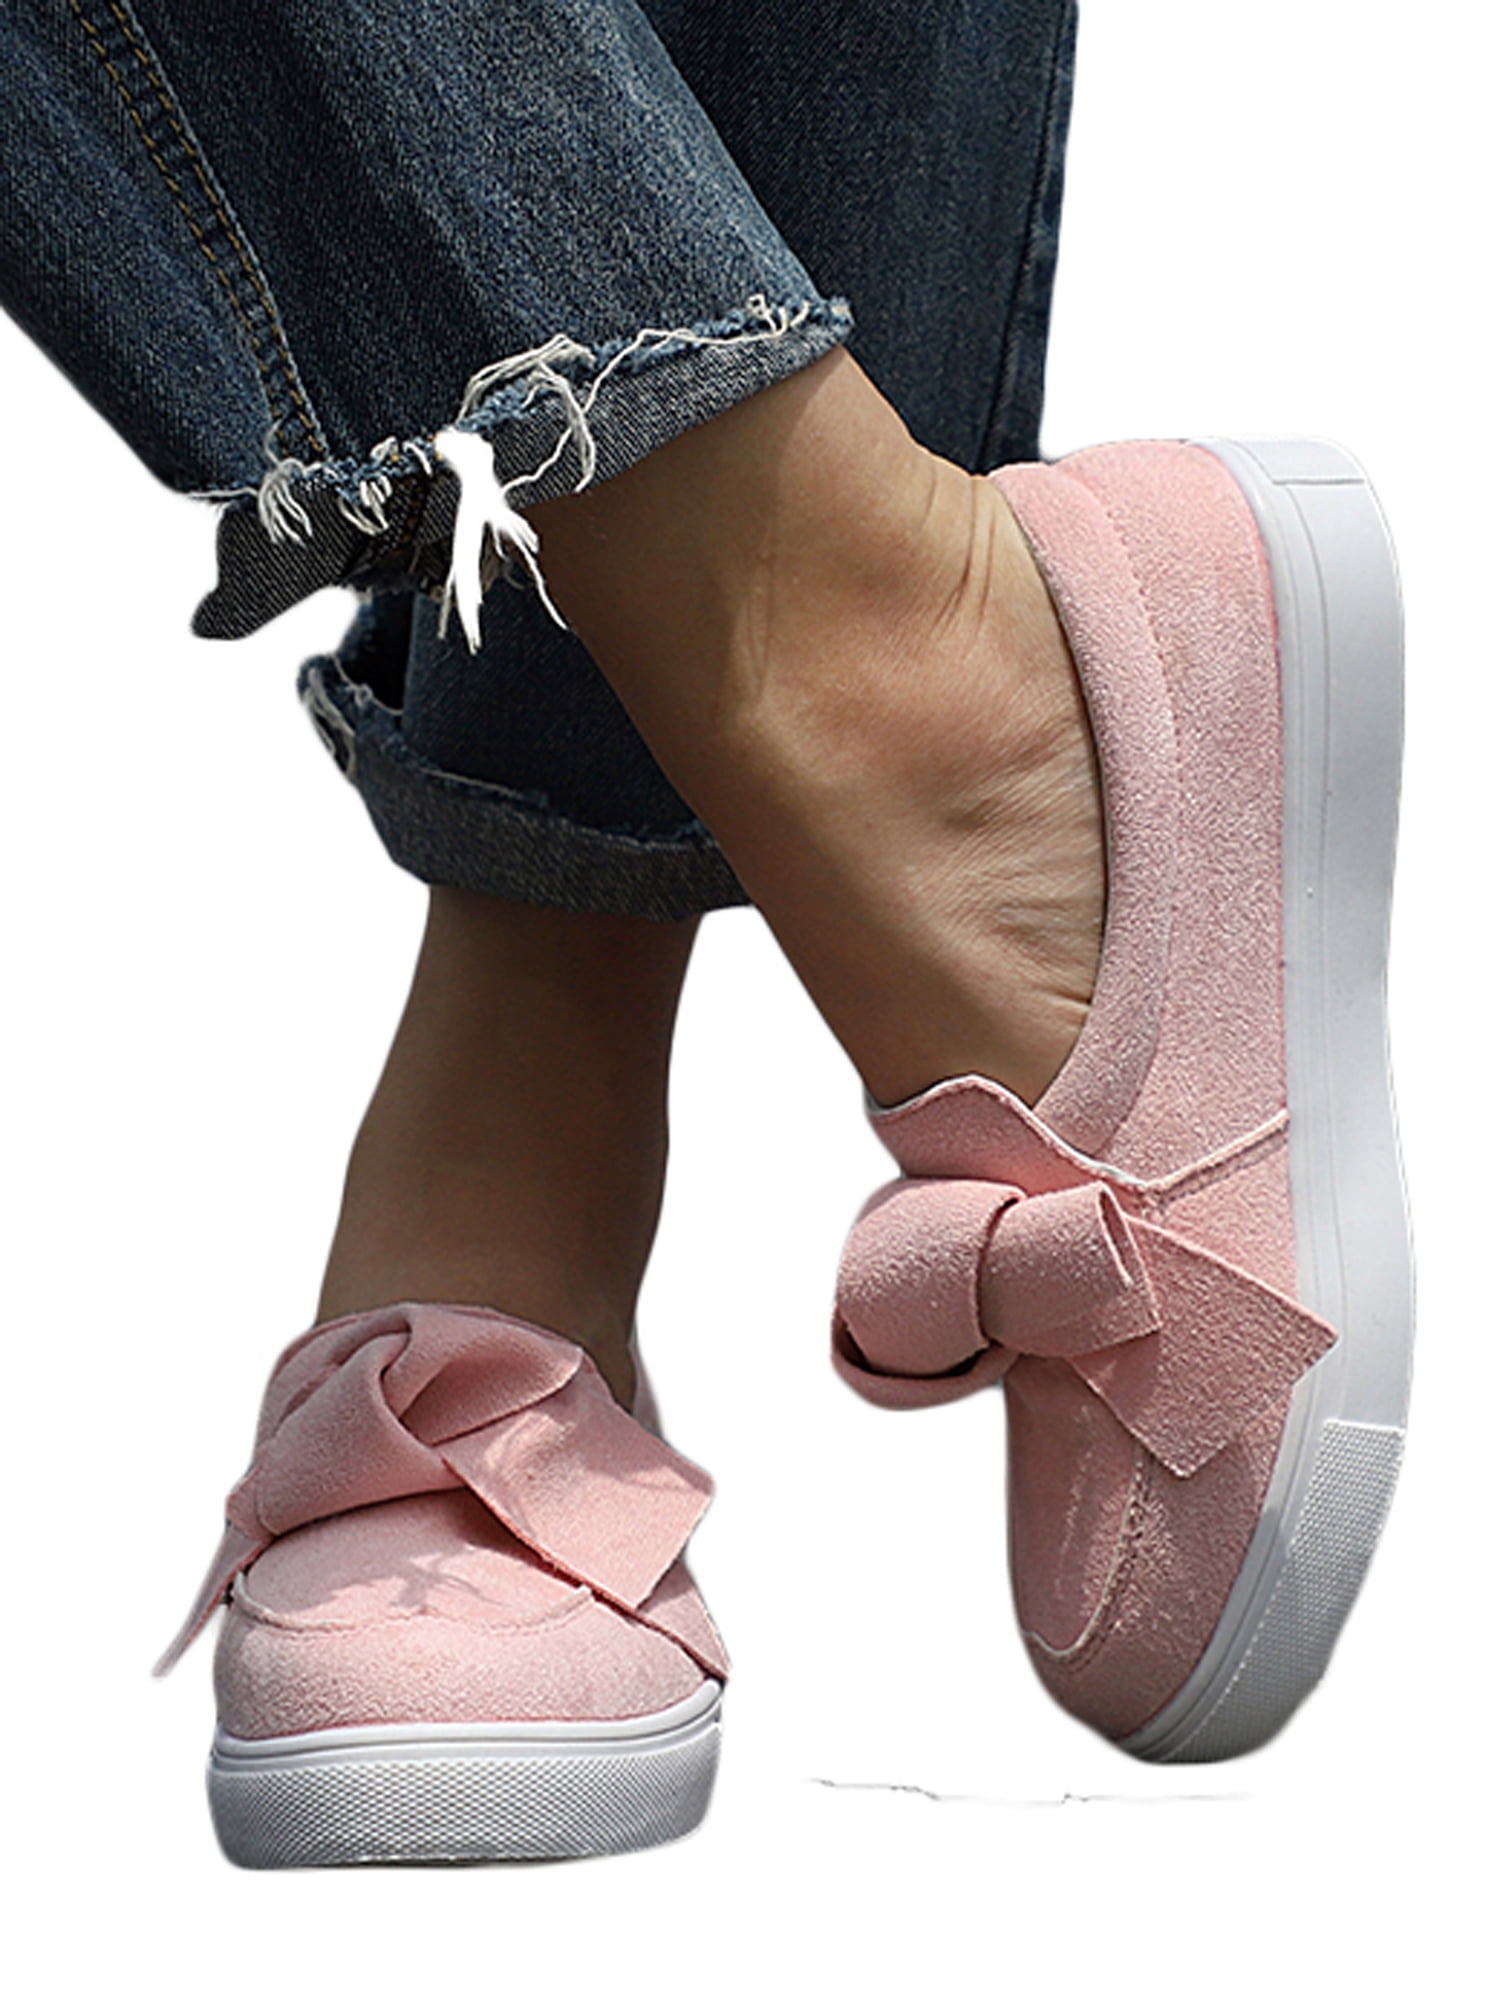 New Womens Flat Casual Sneakers Bow Comfy Slip On Trainers Plimsolls Pumps Shoes 